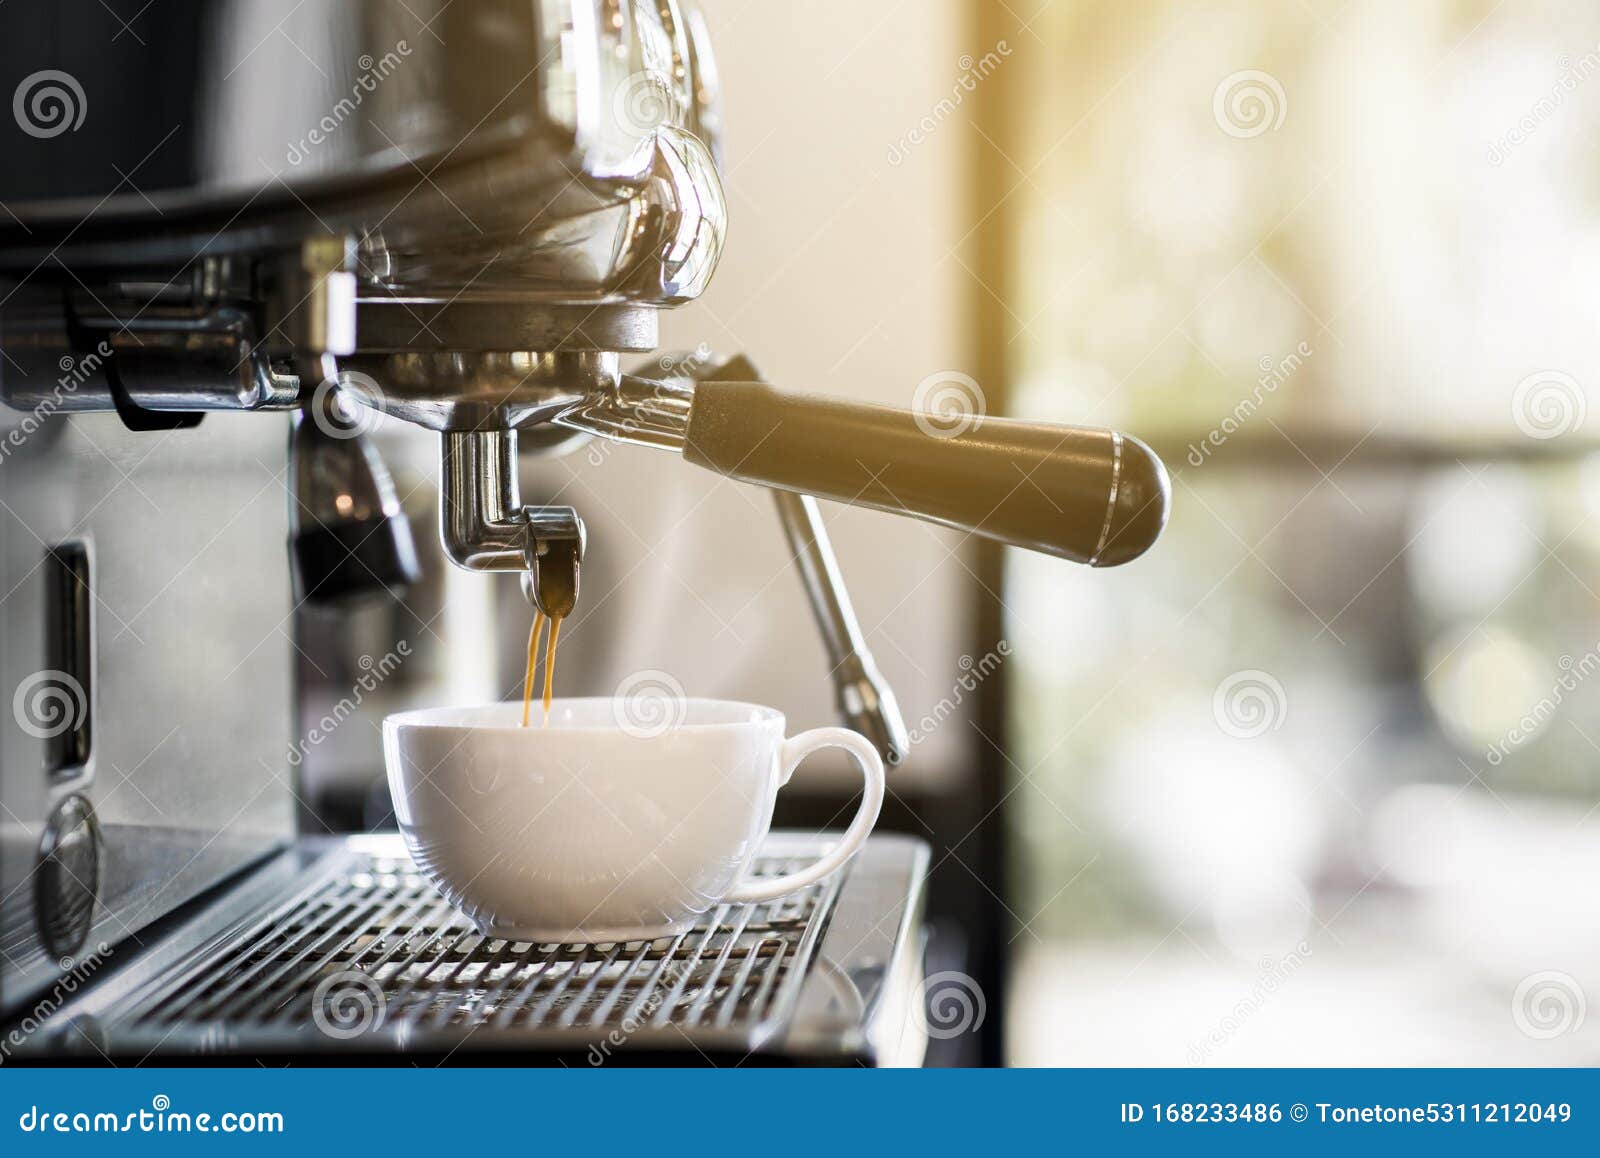 professional   photos of coffee machines that are filling coffee into a cup